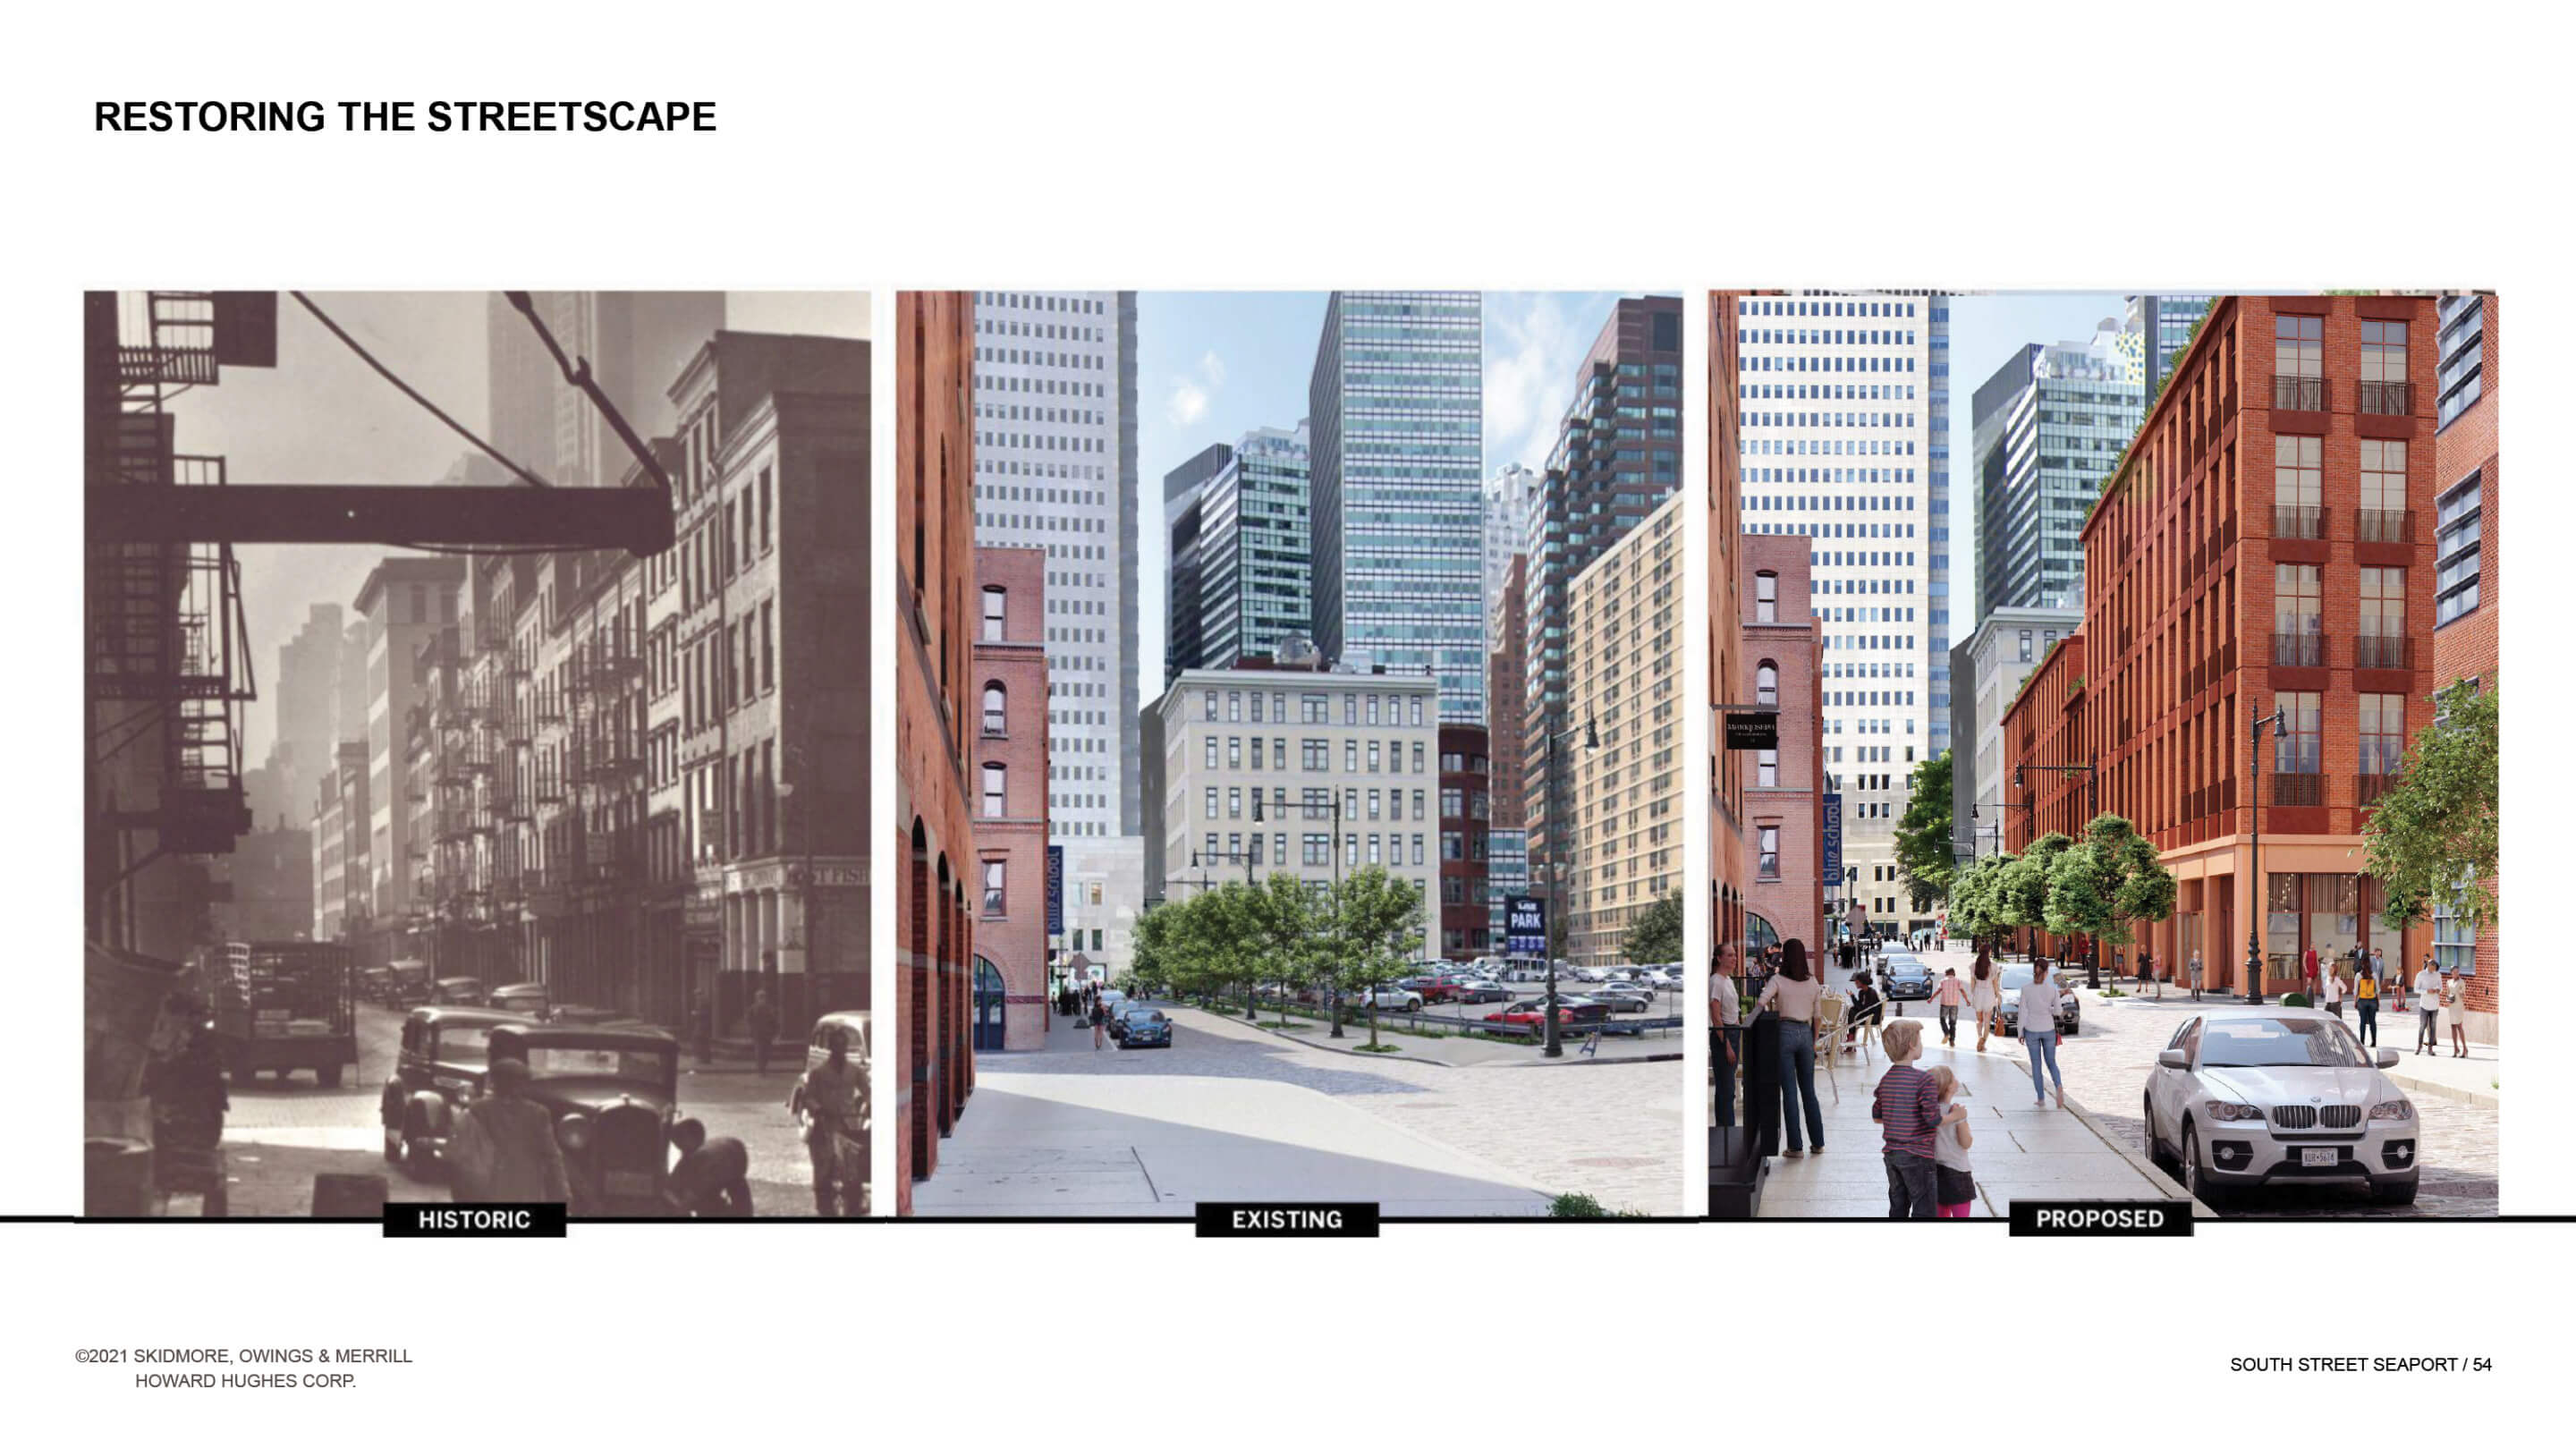 A tripartite collage of the south street seaport and 250 water street site